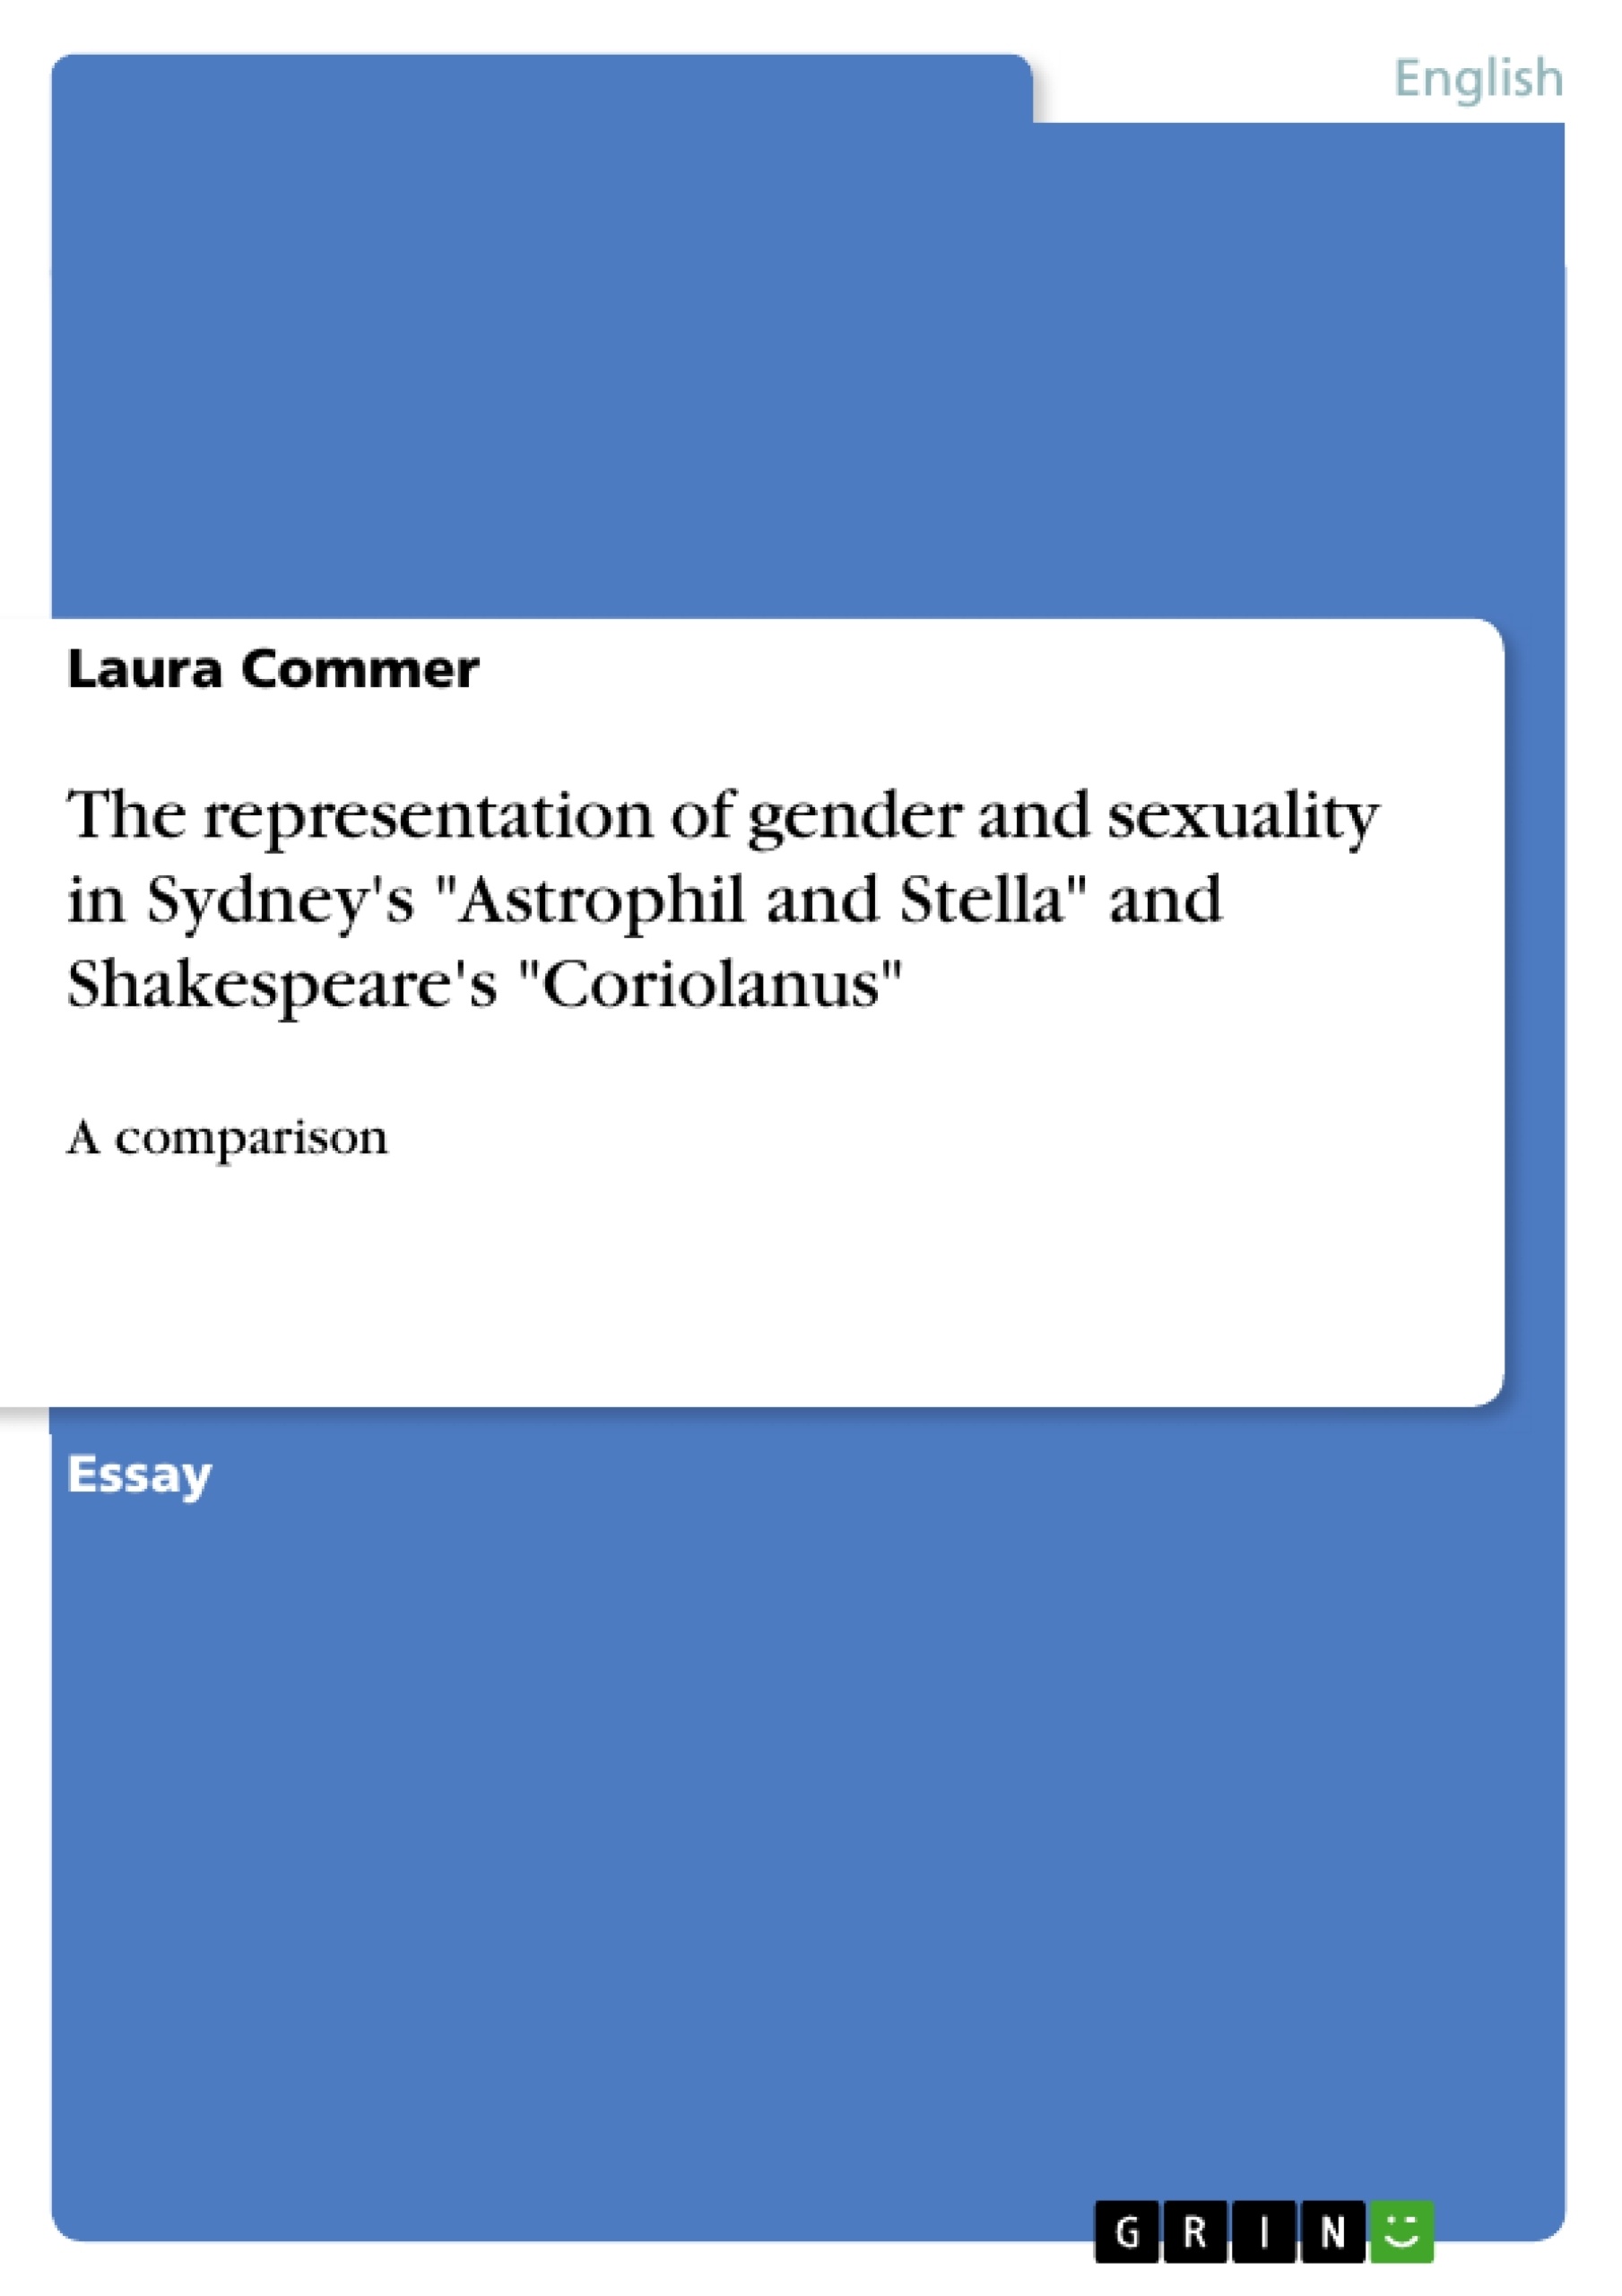 Title: The representation of gender and sexuality in Sydney's "Astrophil and Stella" and Shakespeare's "Coriolanus"